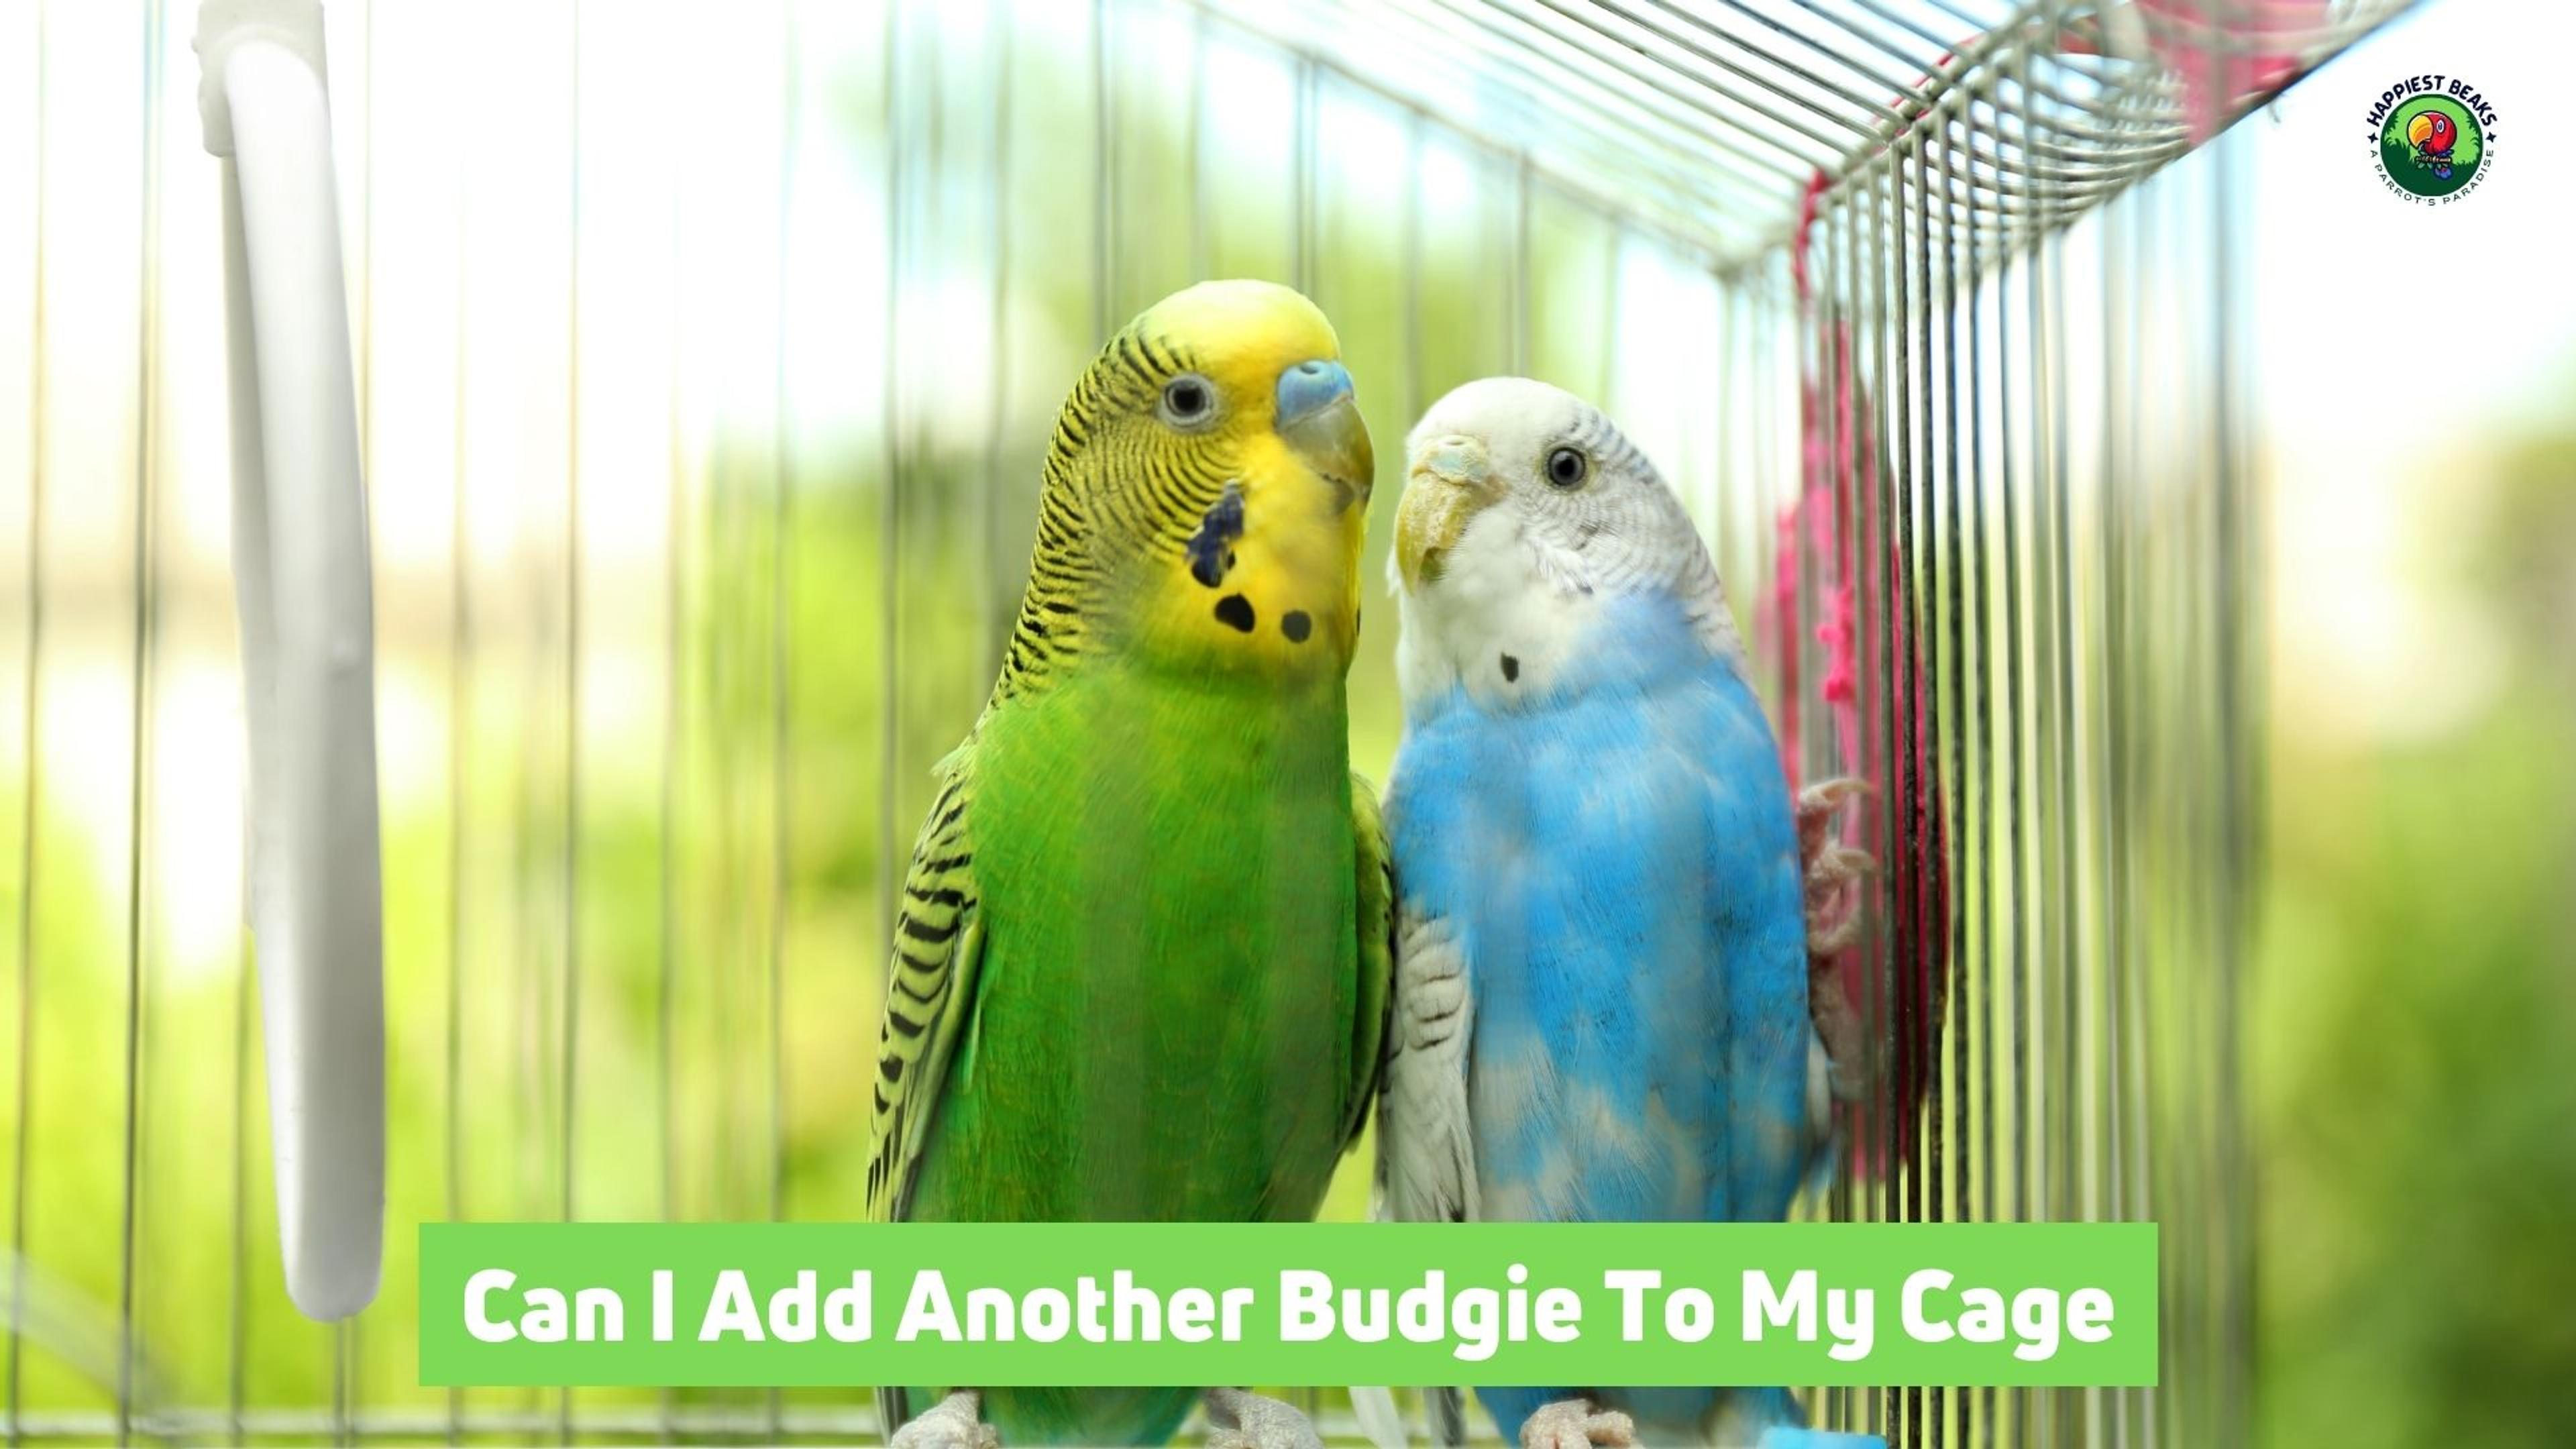 Can I Add Another Budgie to my Cage?